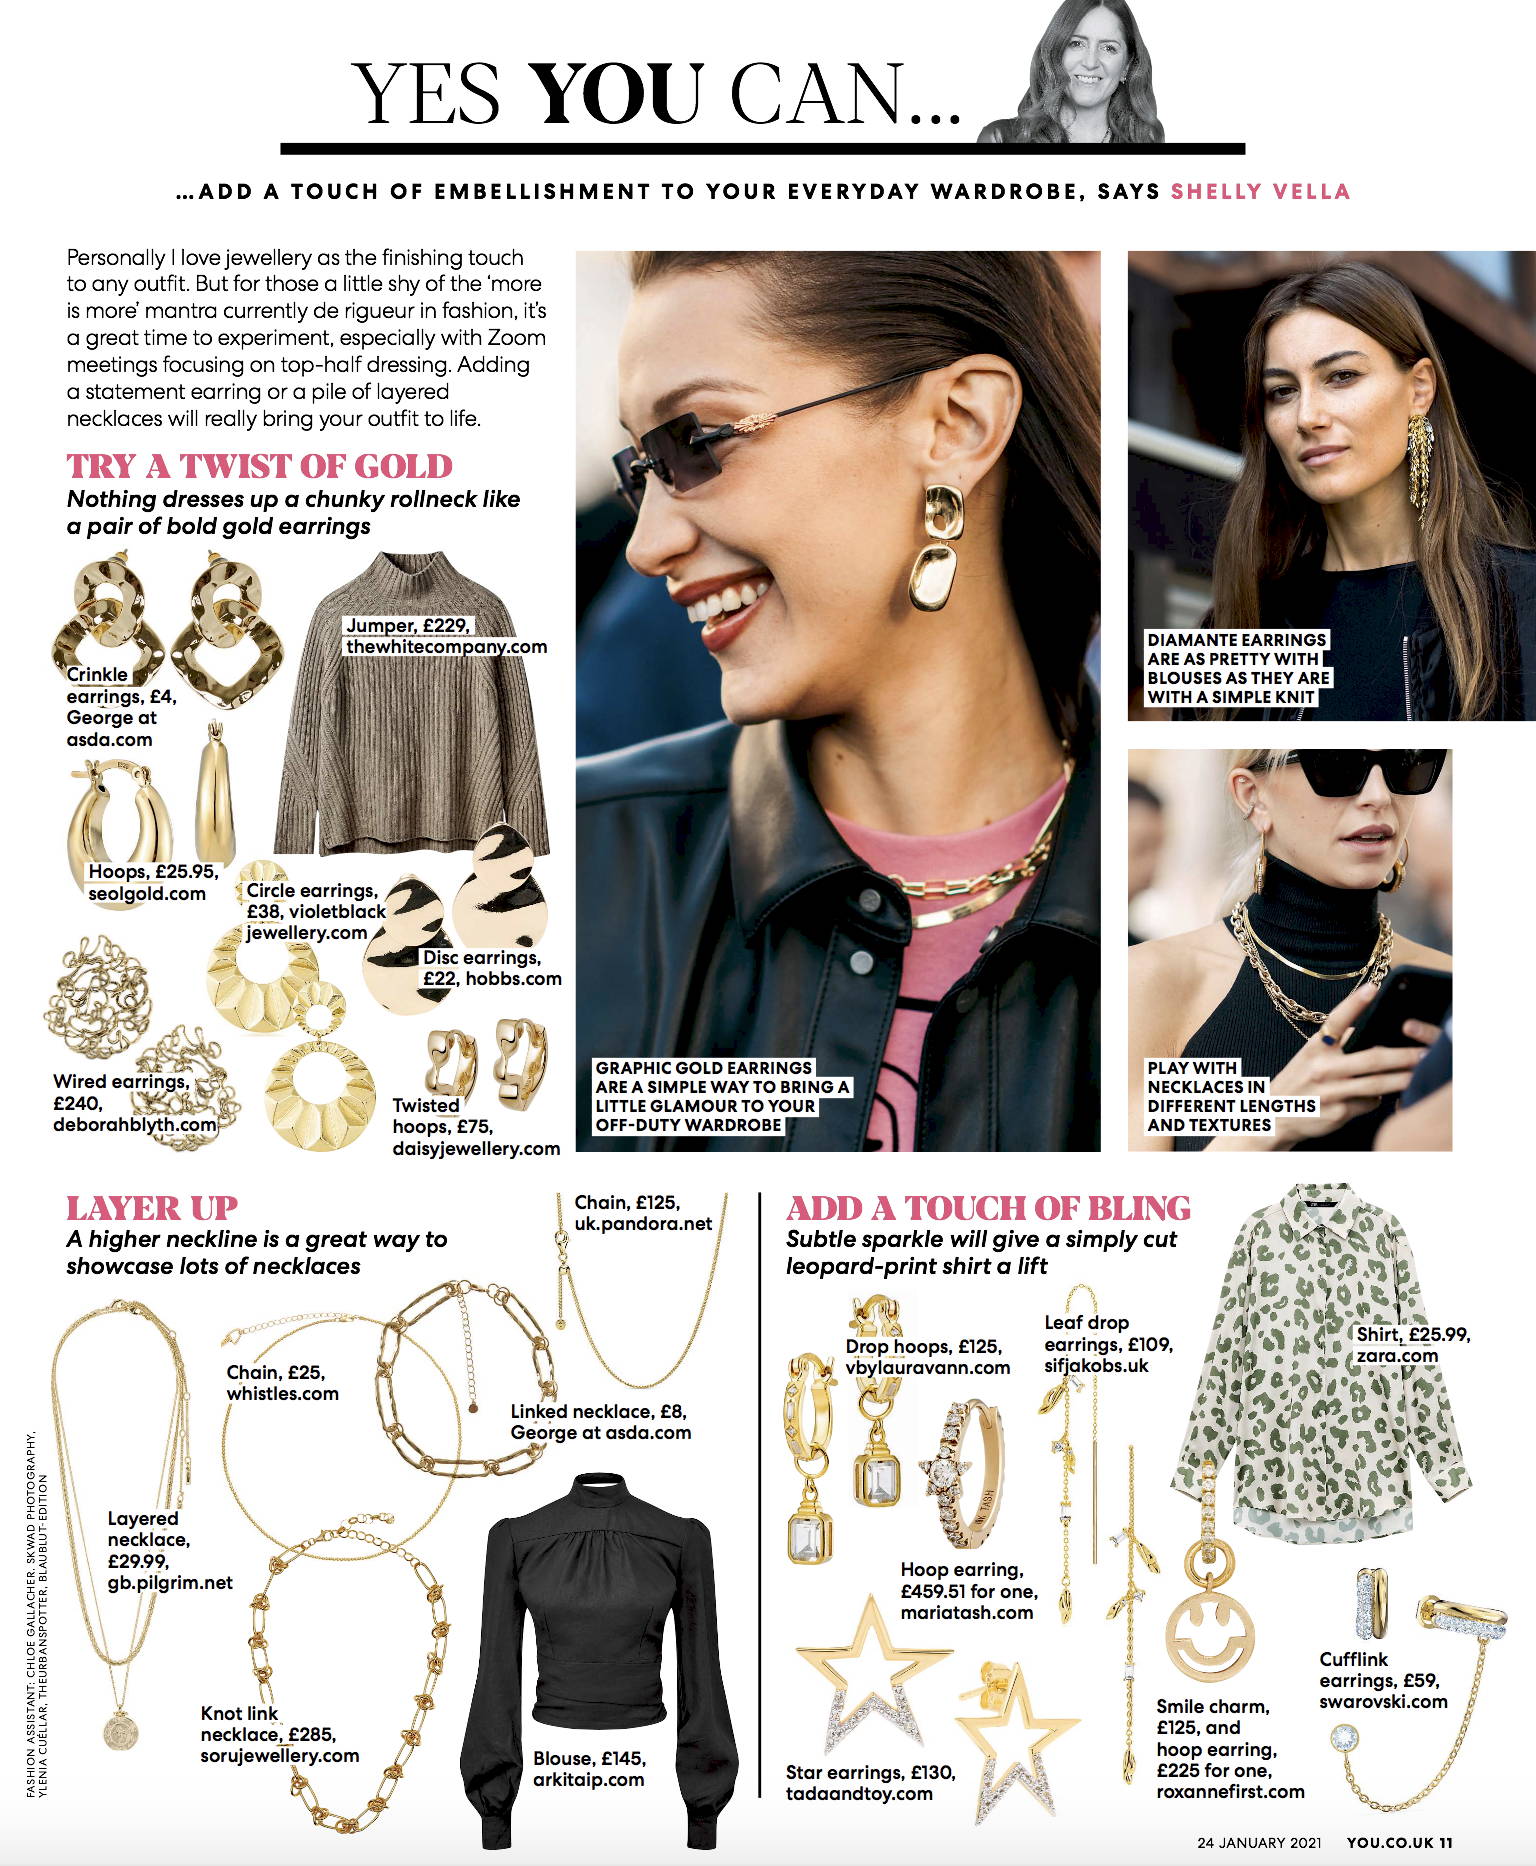 IONIAN NECKLACE SORU IN YOU MAGAZINE